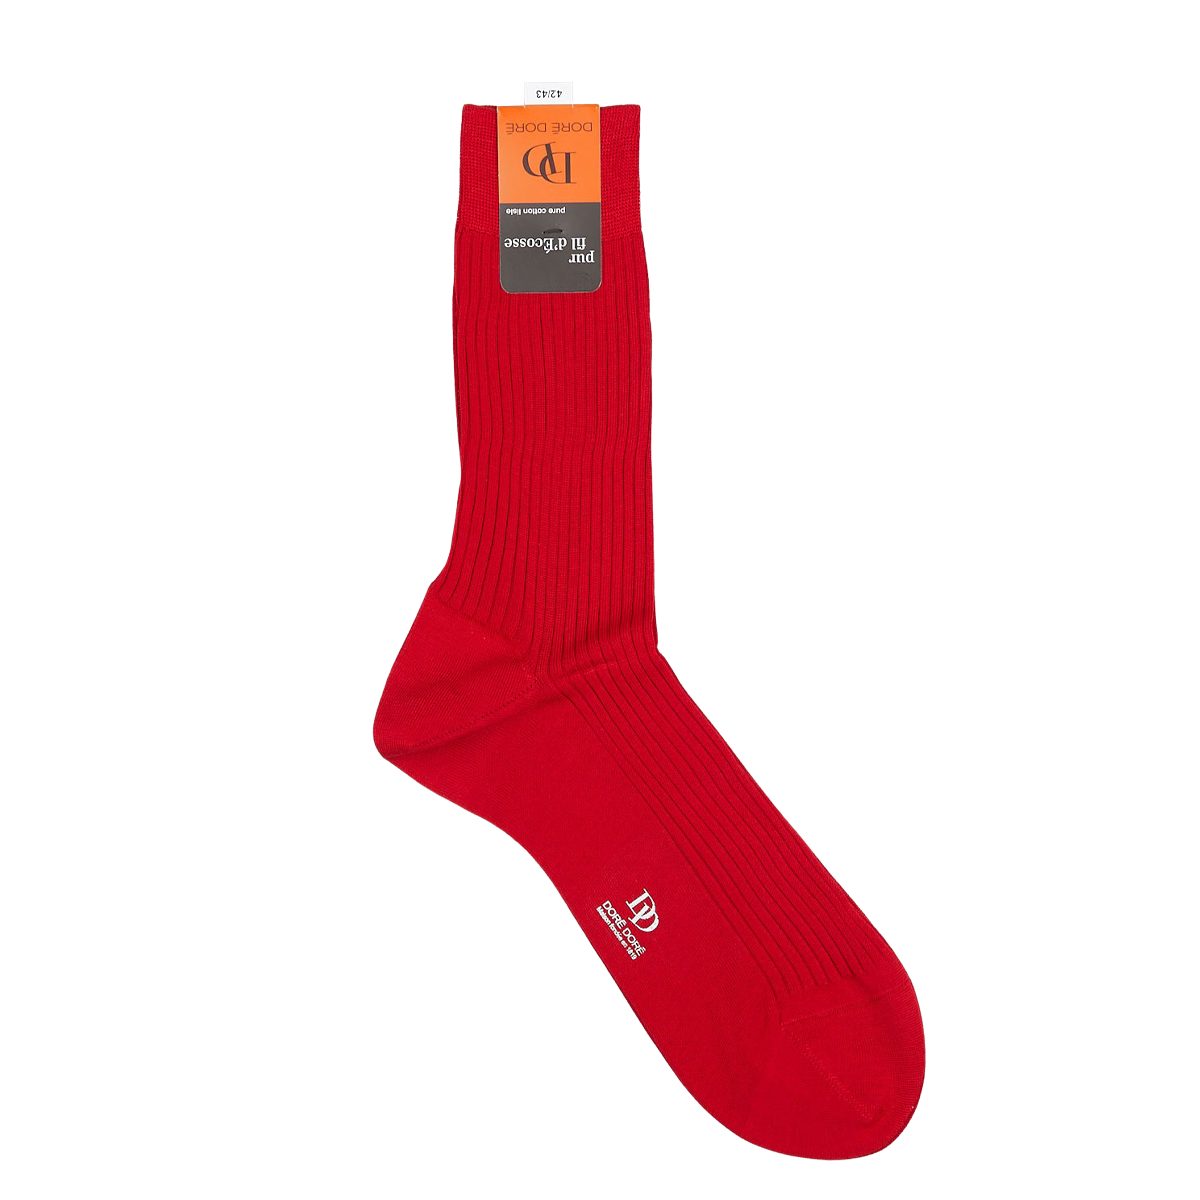 A pair of Groseille Red Cotton Fil d'Ècosse Ribbed Socks by Doré Doré, with a logo near the top, crafted from mercerised cotton lisle, displayed against a plain white background.